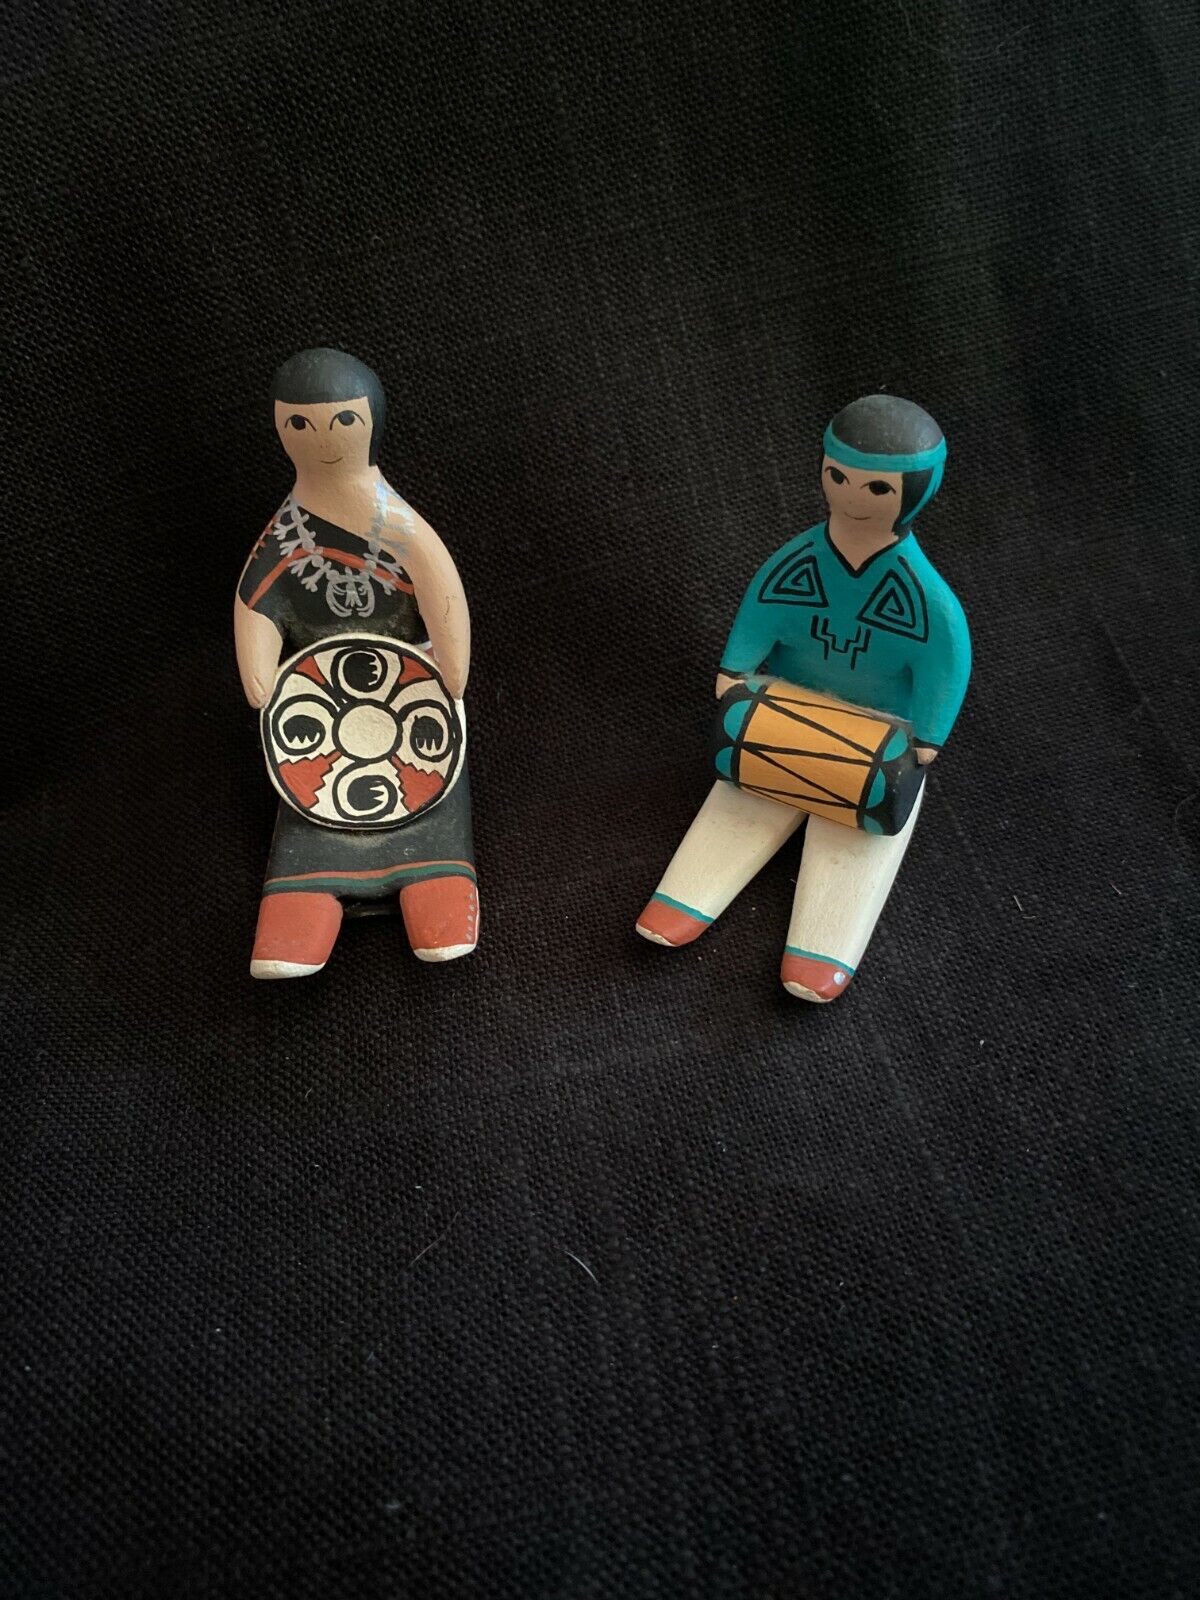 Cochiti  Pueblo Man w/Drum & Woman with Plate Figures Mary E. Quintana